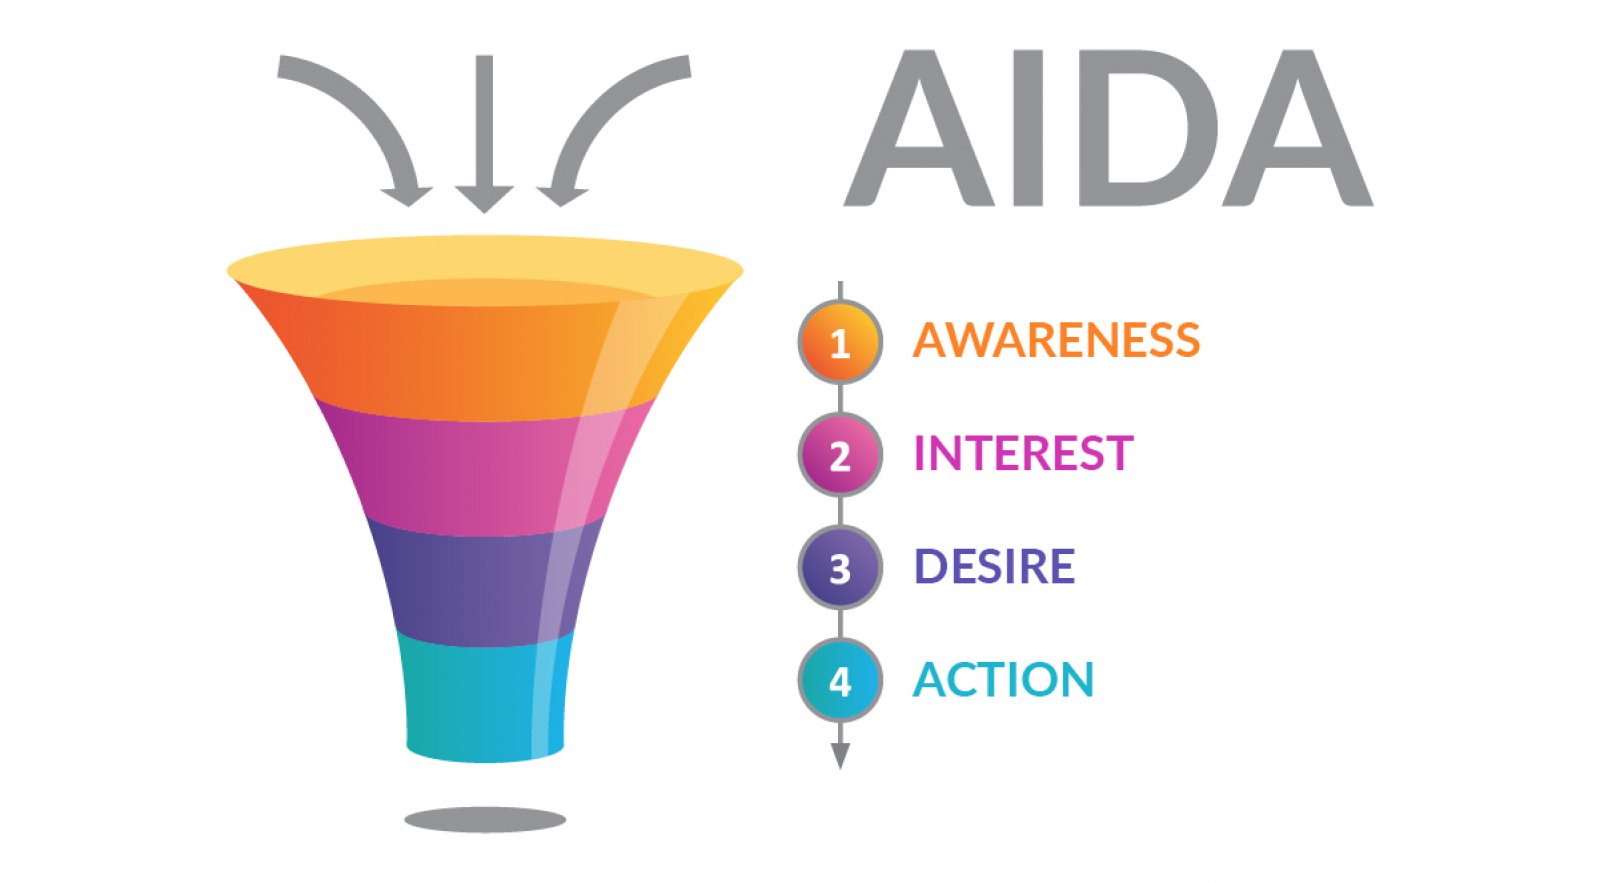 Have you introduced your small business to the AIDA model (Attention Interest Desire Action)?